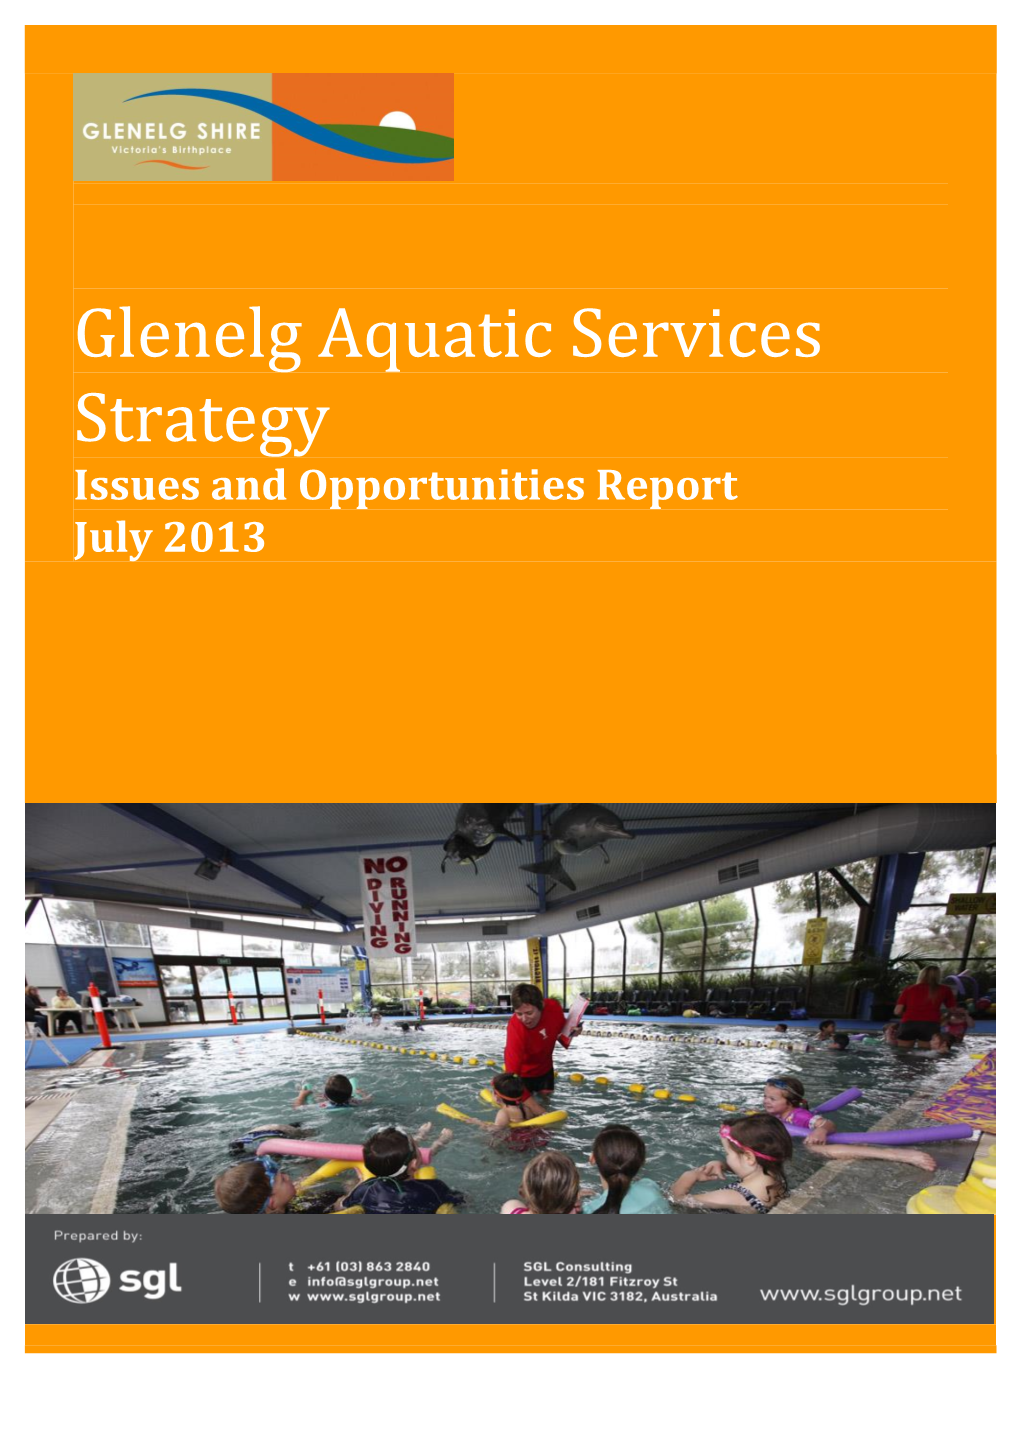 Glenelg Aquatic Services Strategy Issues and Opportunities Report